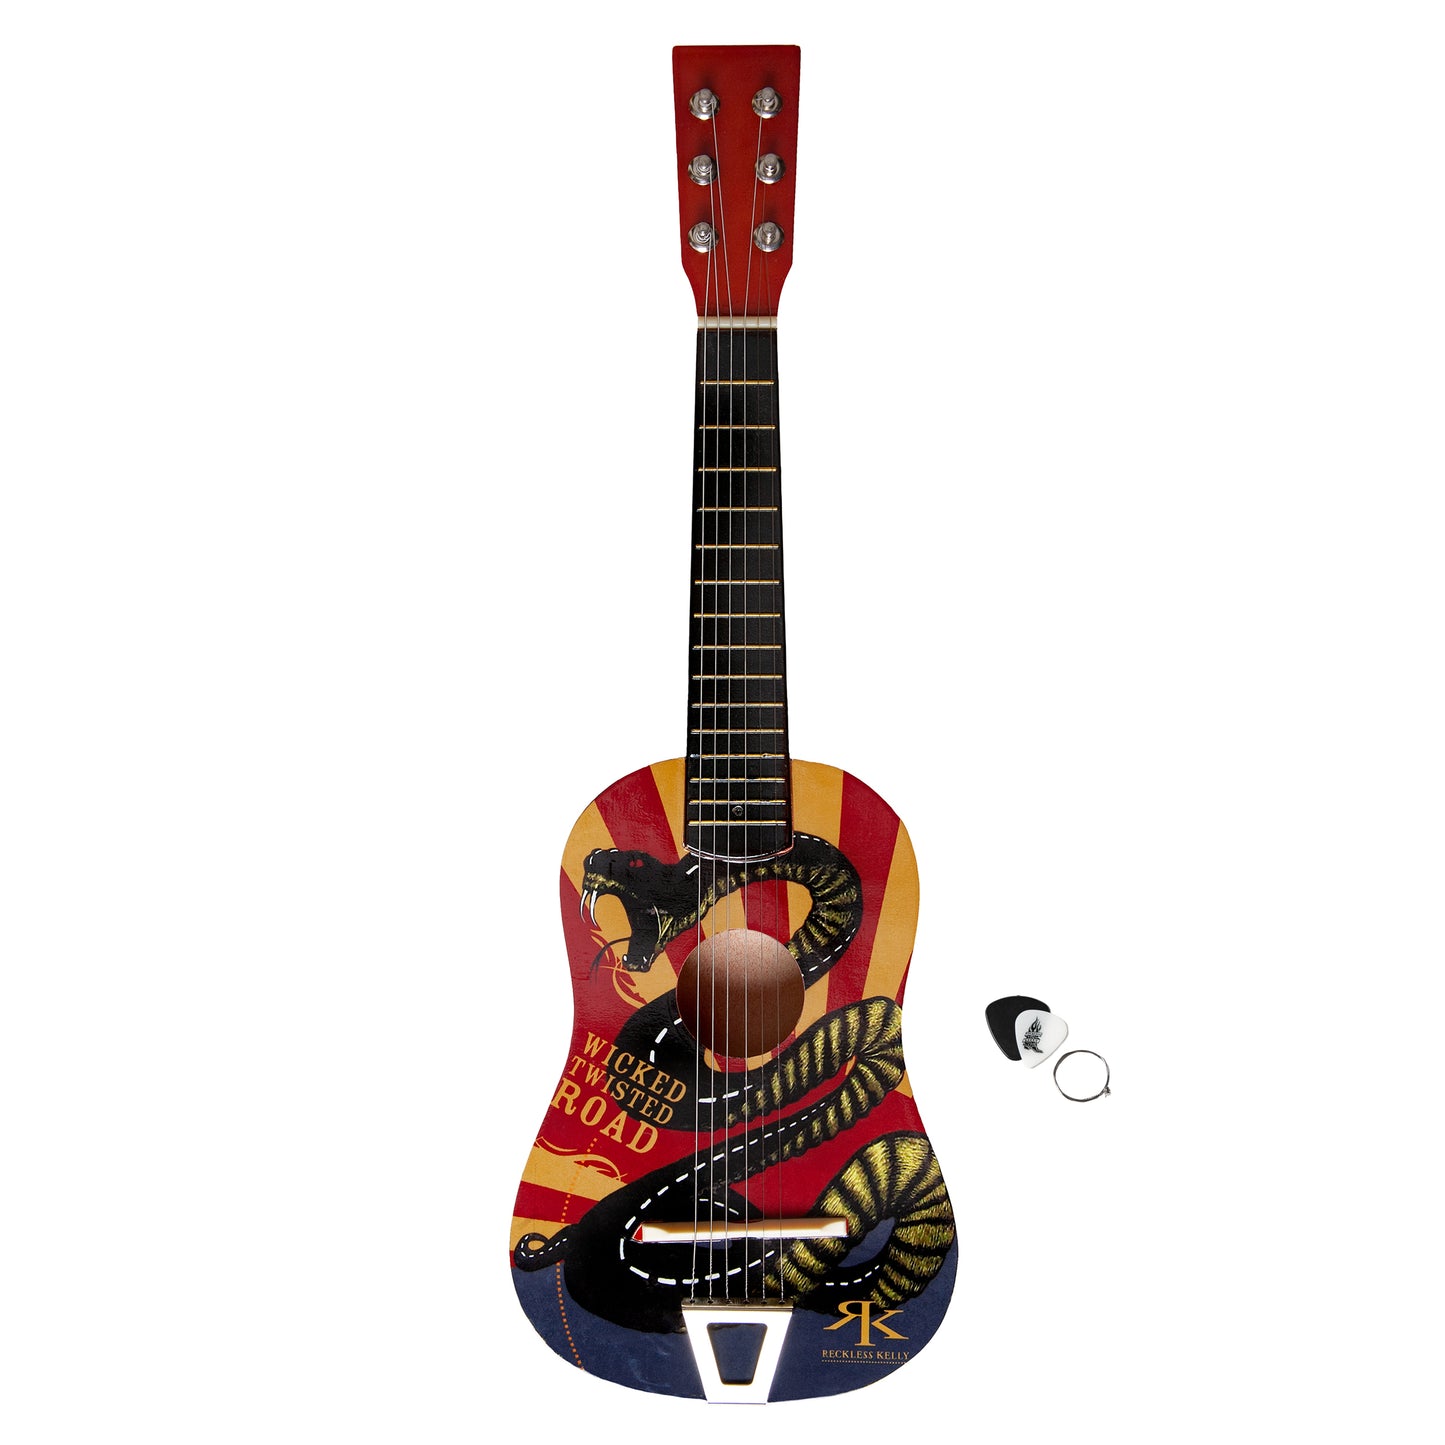 Wicked Twisted Road 23" Mini Guitar